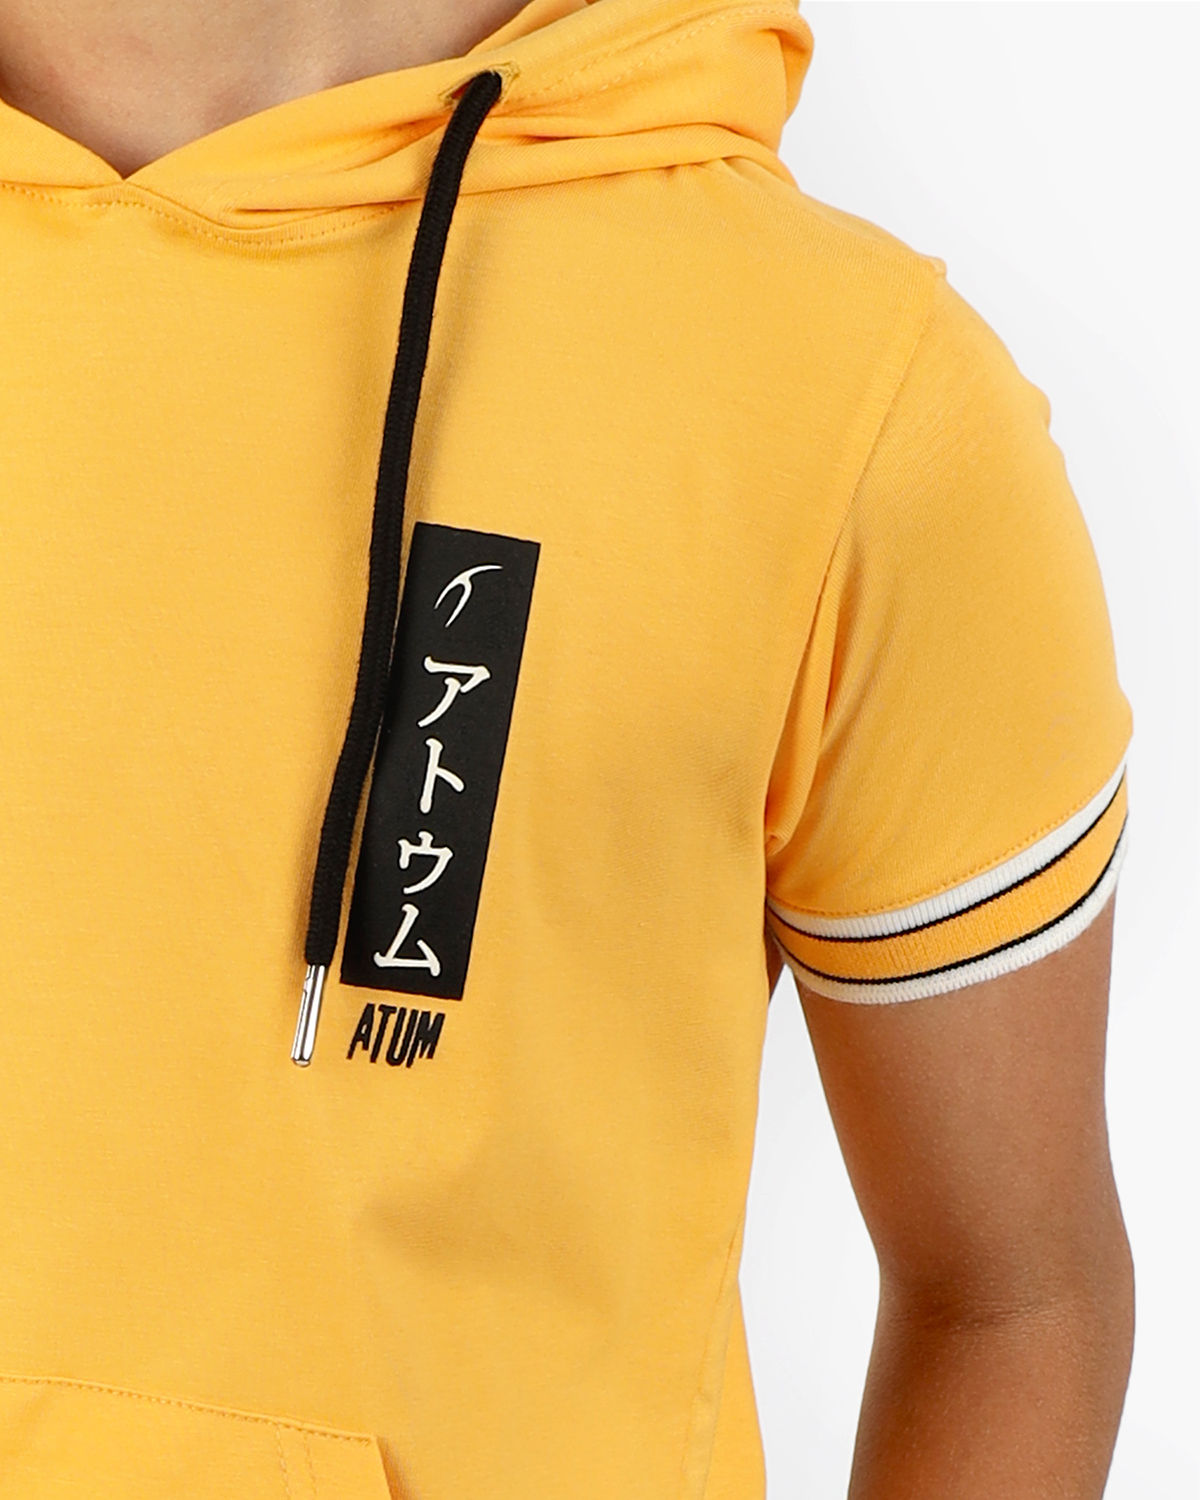 Photo by 𝗔𝗧𝗨𝗠 SPORTSWEAR ® on December 20, 2022. May be an image of 1 boy wears a yellow t-shirt and a text said '' Atum''.